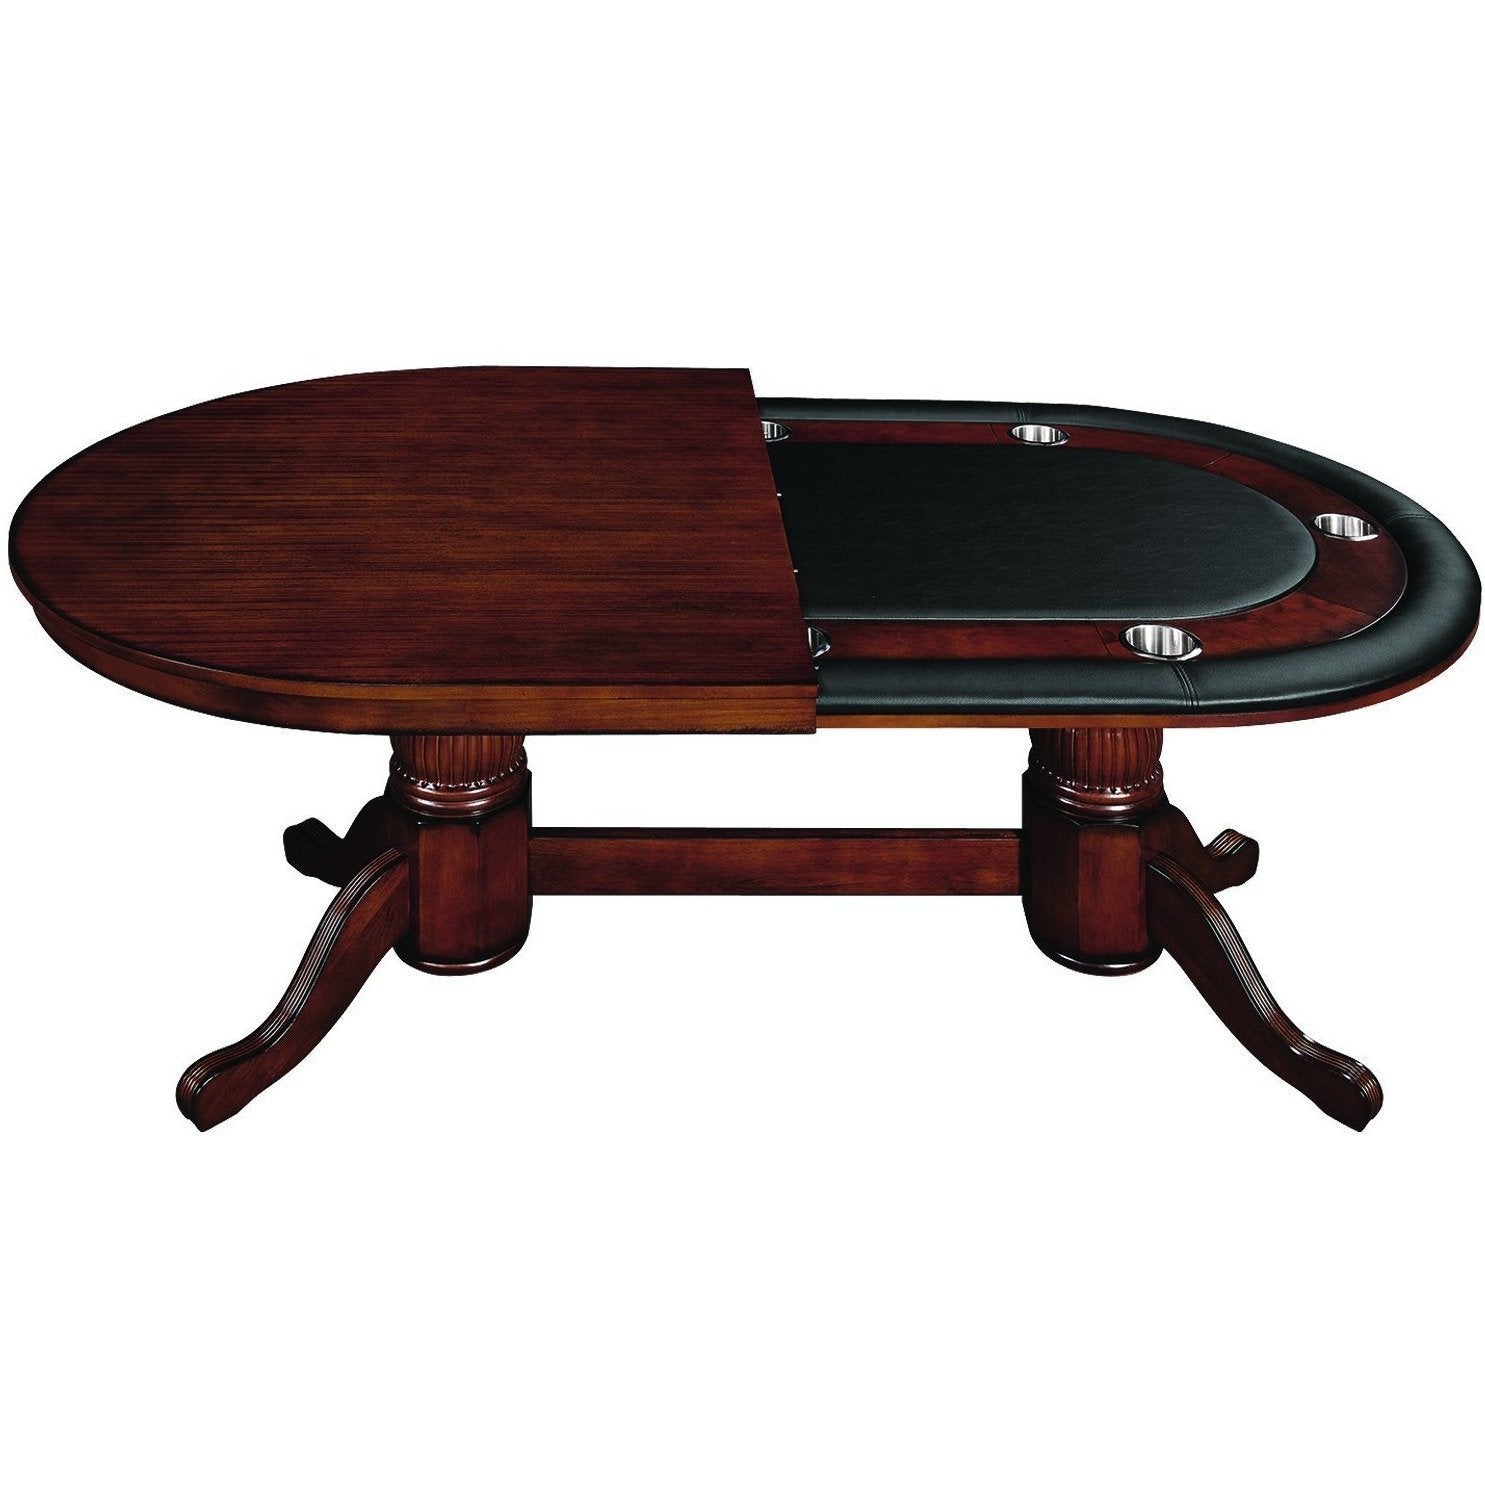 ram game room gtbl84-wt texas holdem game table Chestnut with dining top half cover